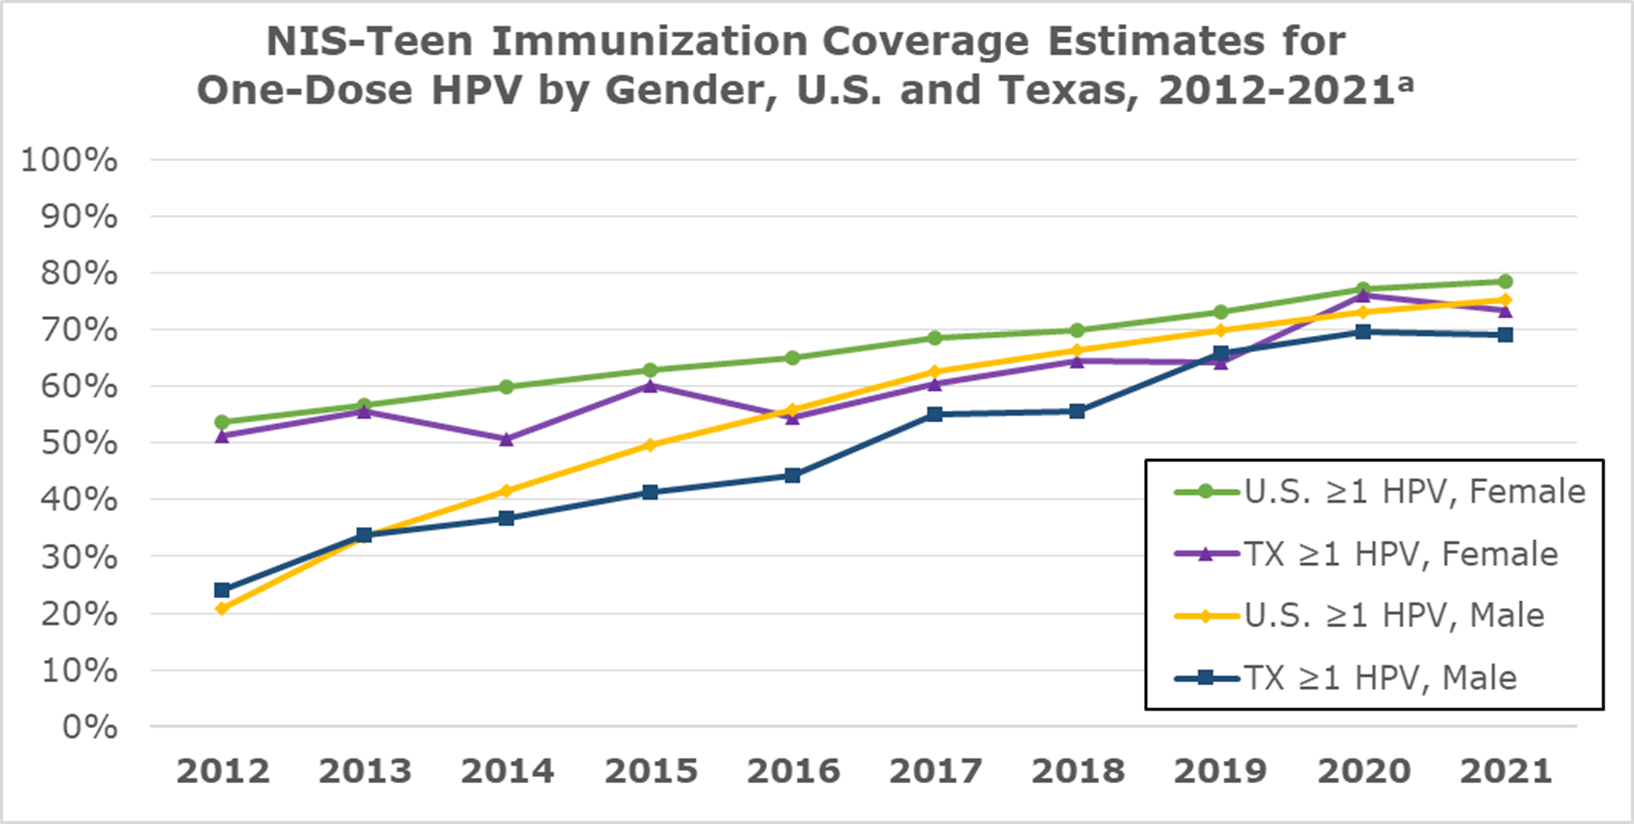 NIS-Teen Immunization Coverage Estimates for One-Dose HPV by Gender, U.S. and Texas, 2012-2021